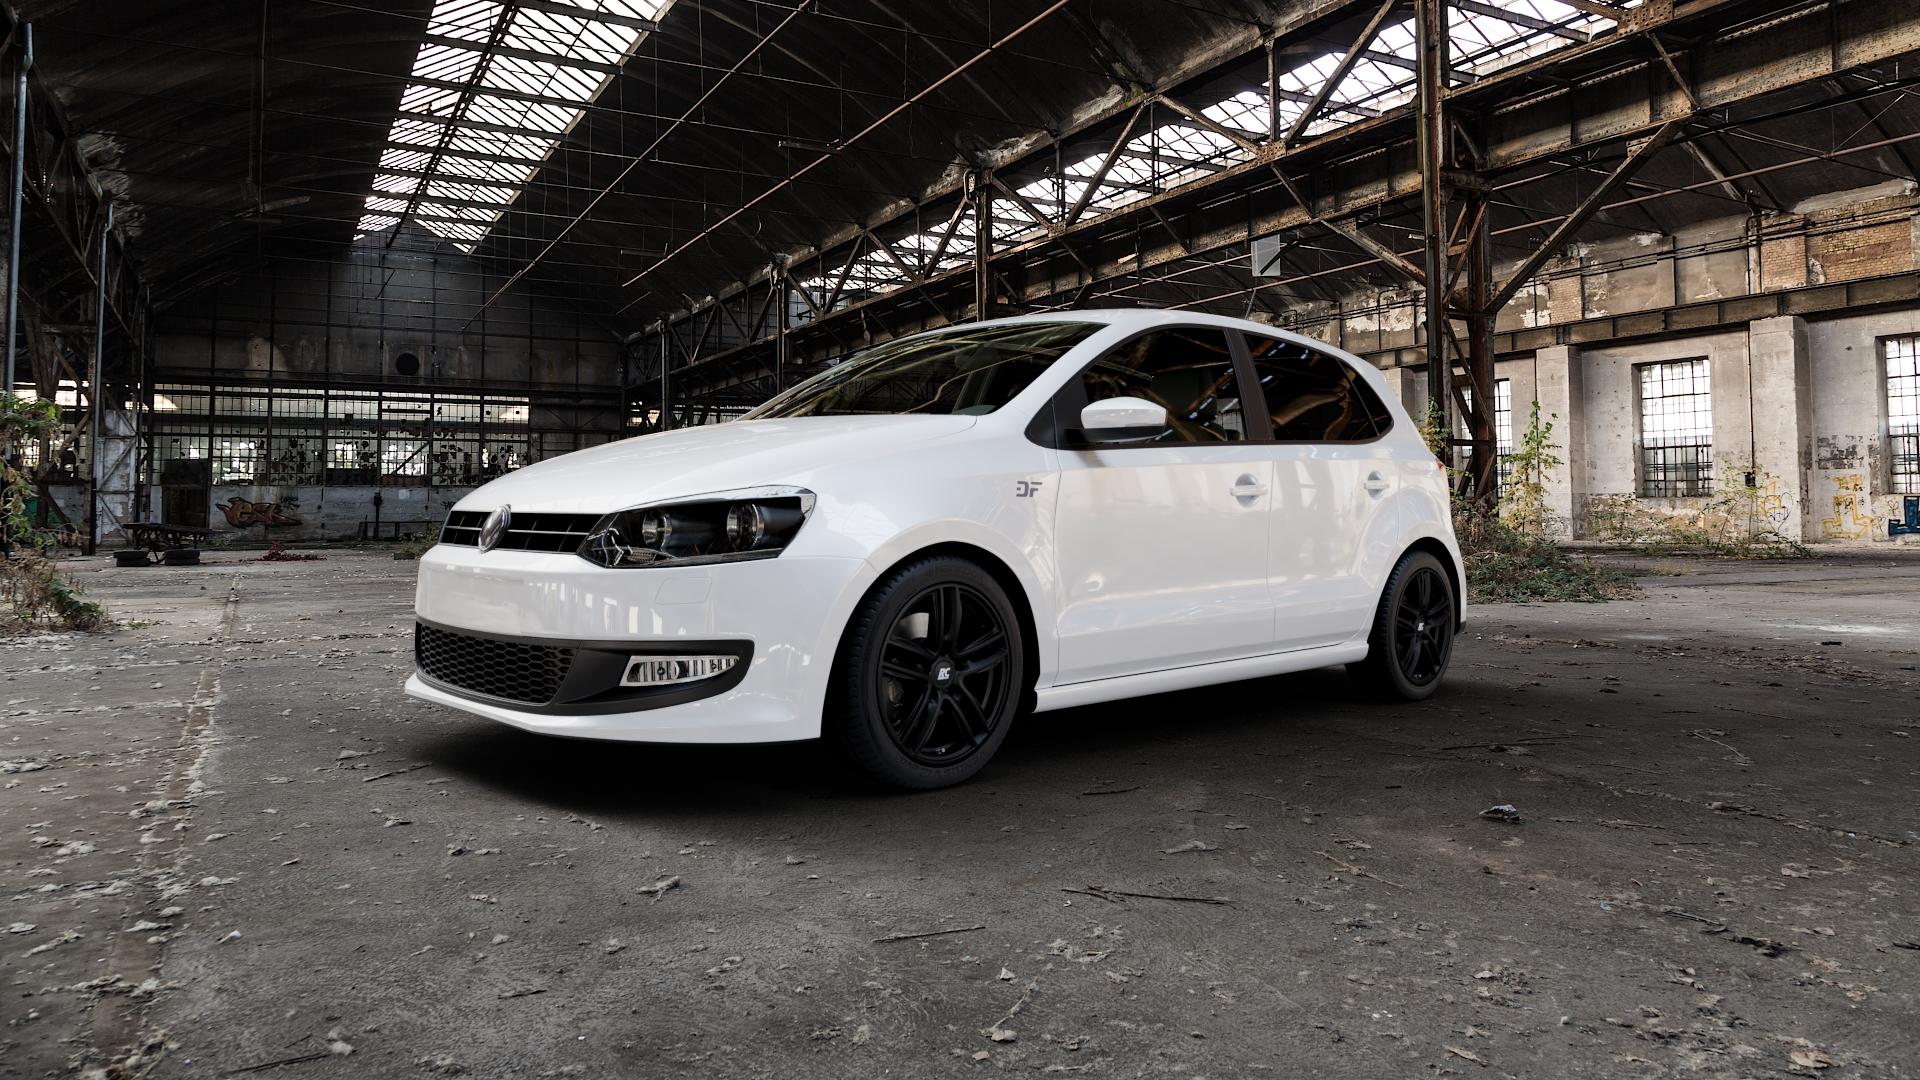 Volkswagen (VW) Polo V Type 6R 1,2l 44kW (60 hp) Wheels and Tyre Packages |  velonity.com